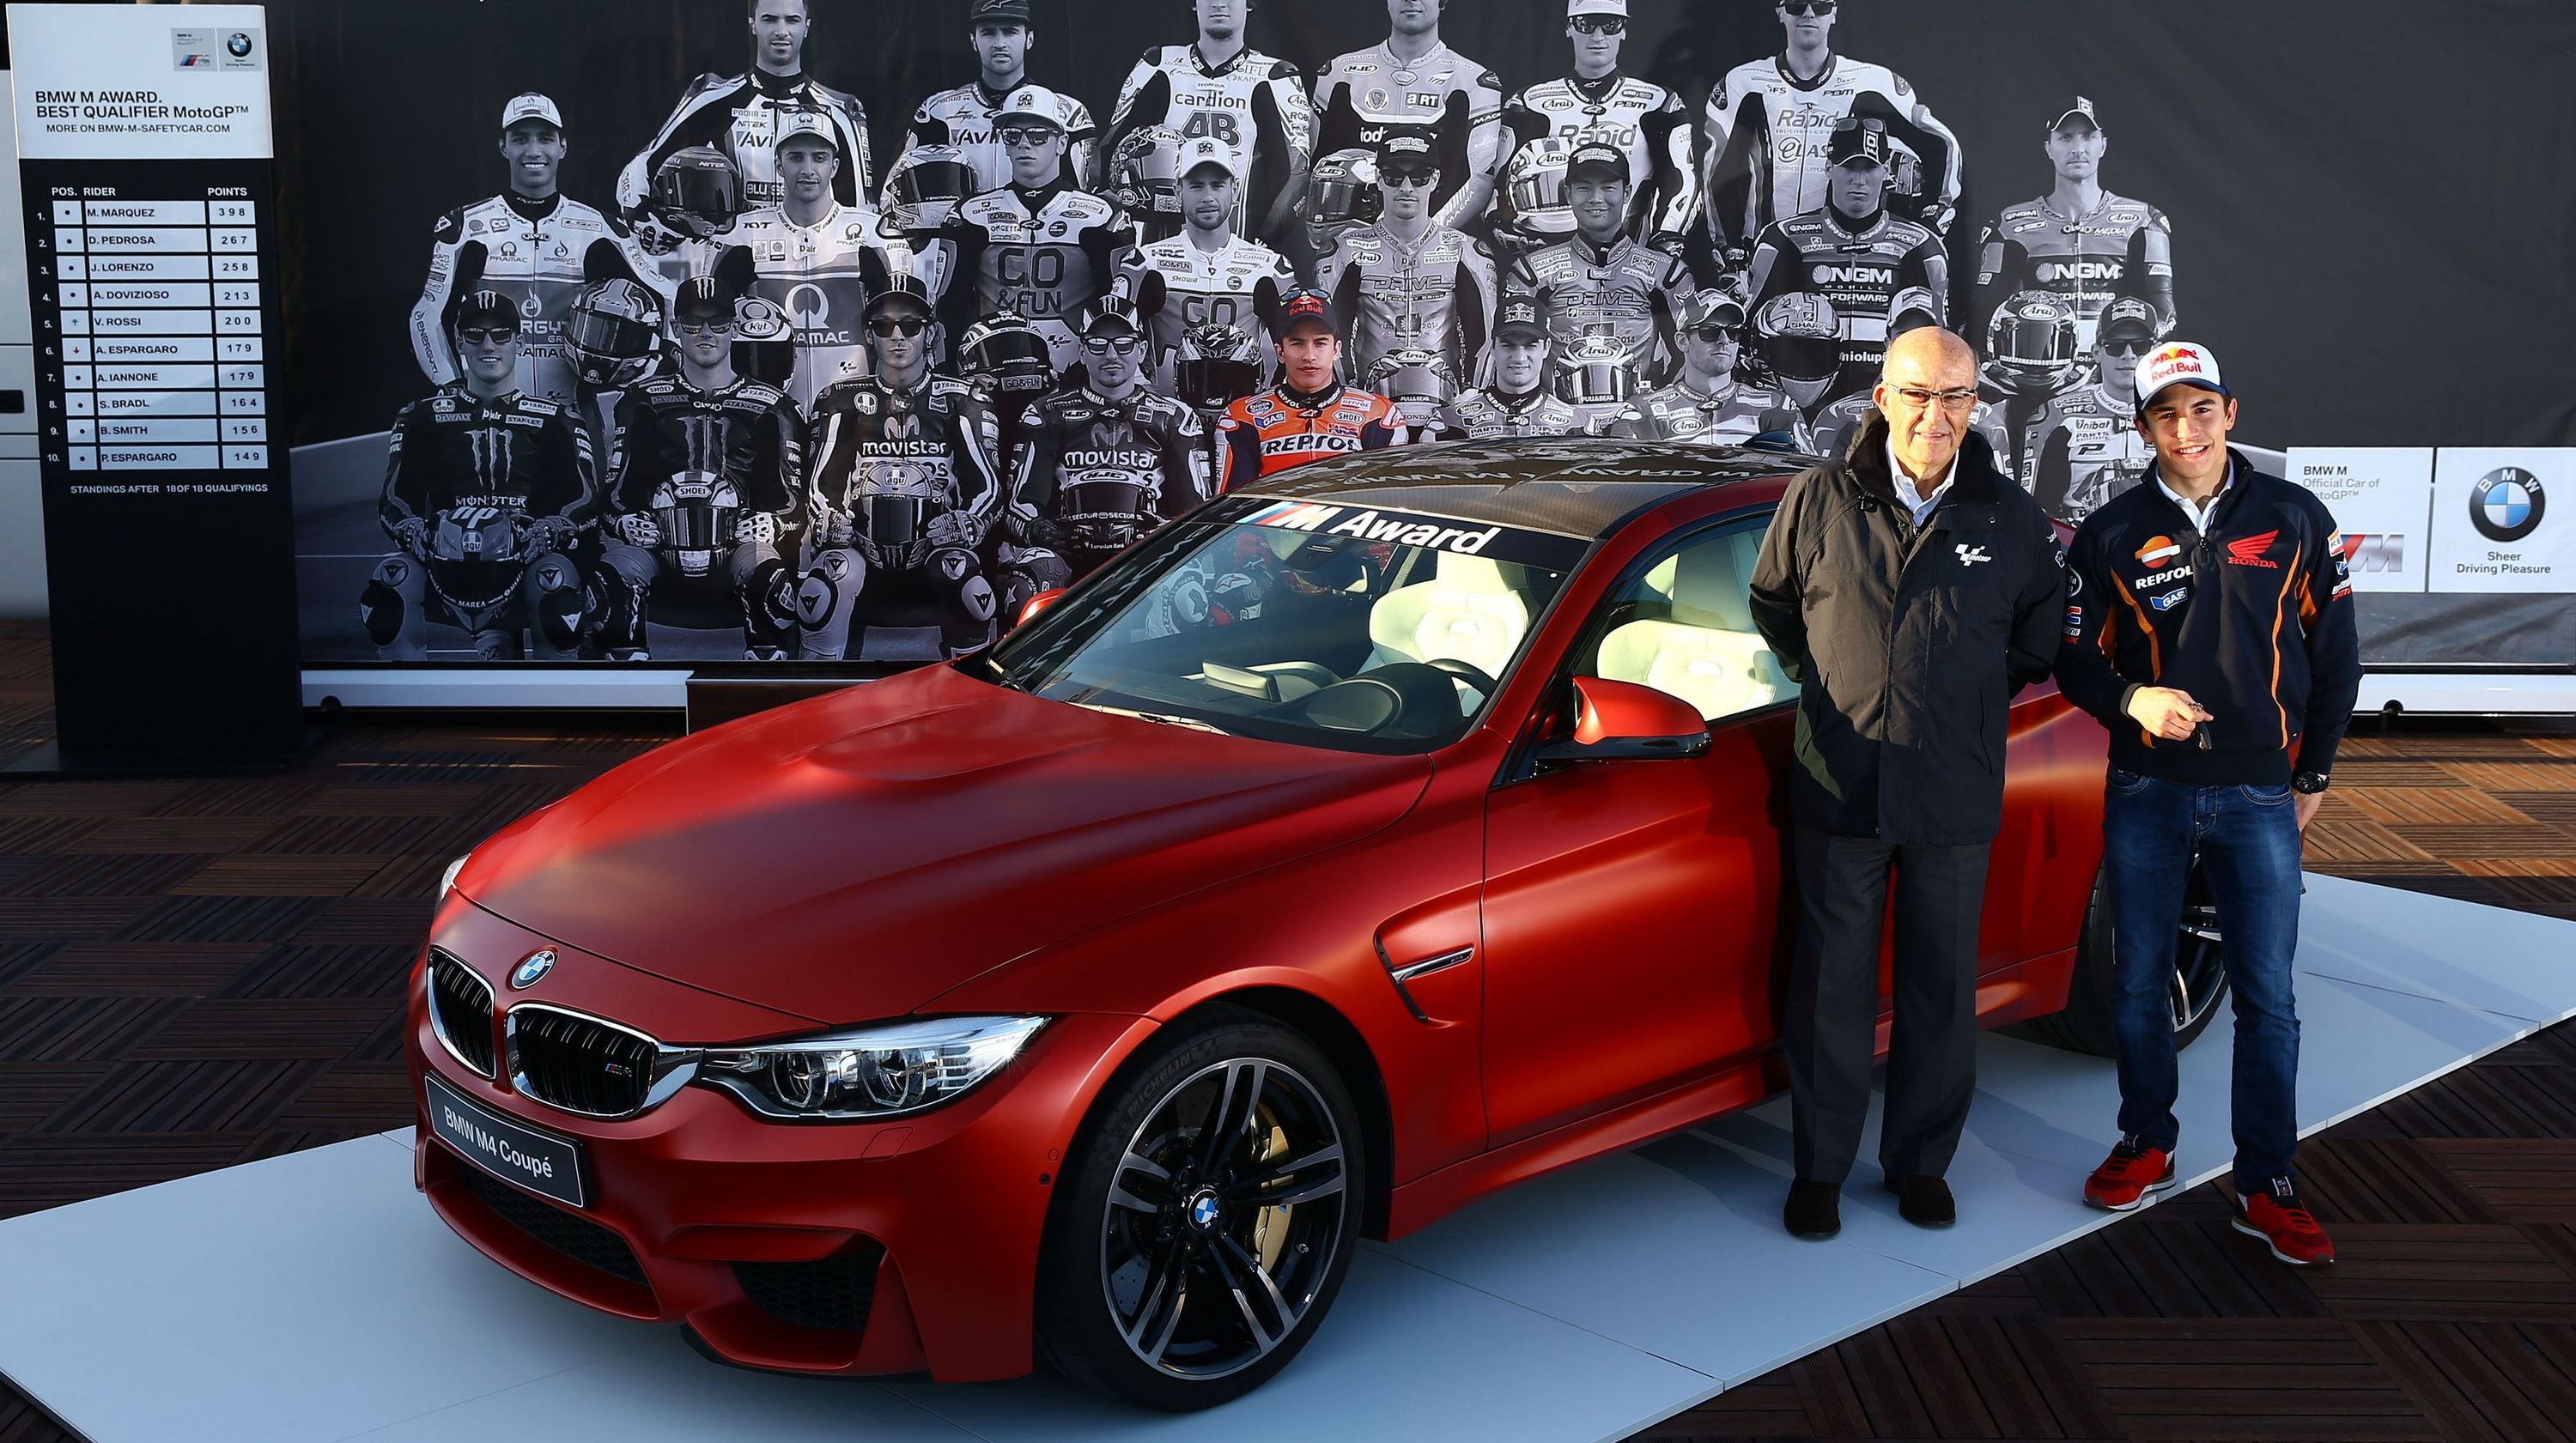  This special-edition BMW M4 Coupe was handed off to Marc Marquez for his 2014 Moto GP Championship. 